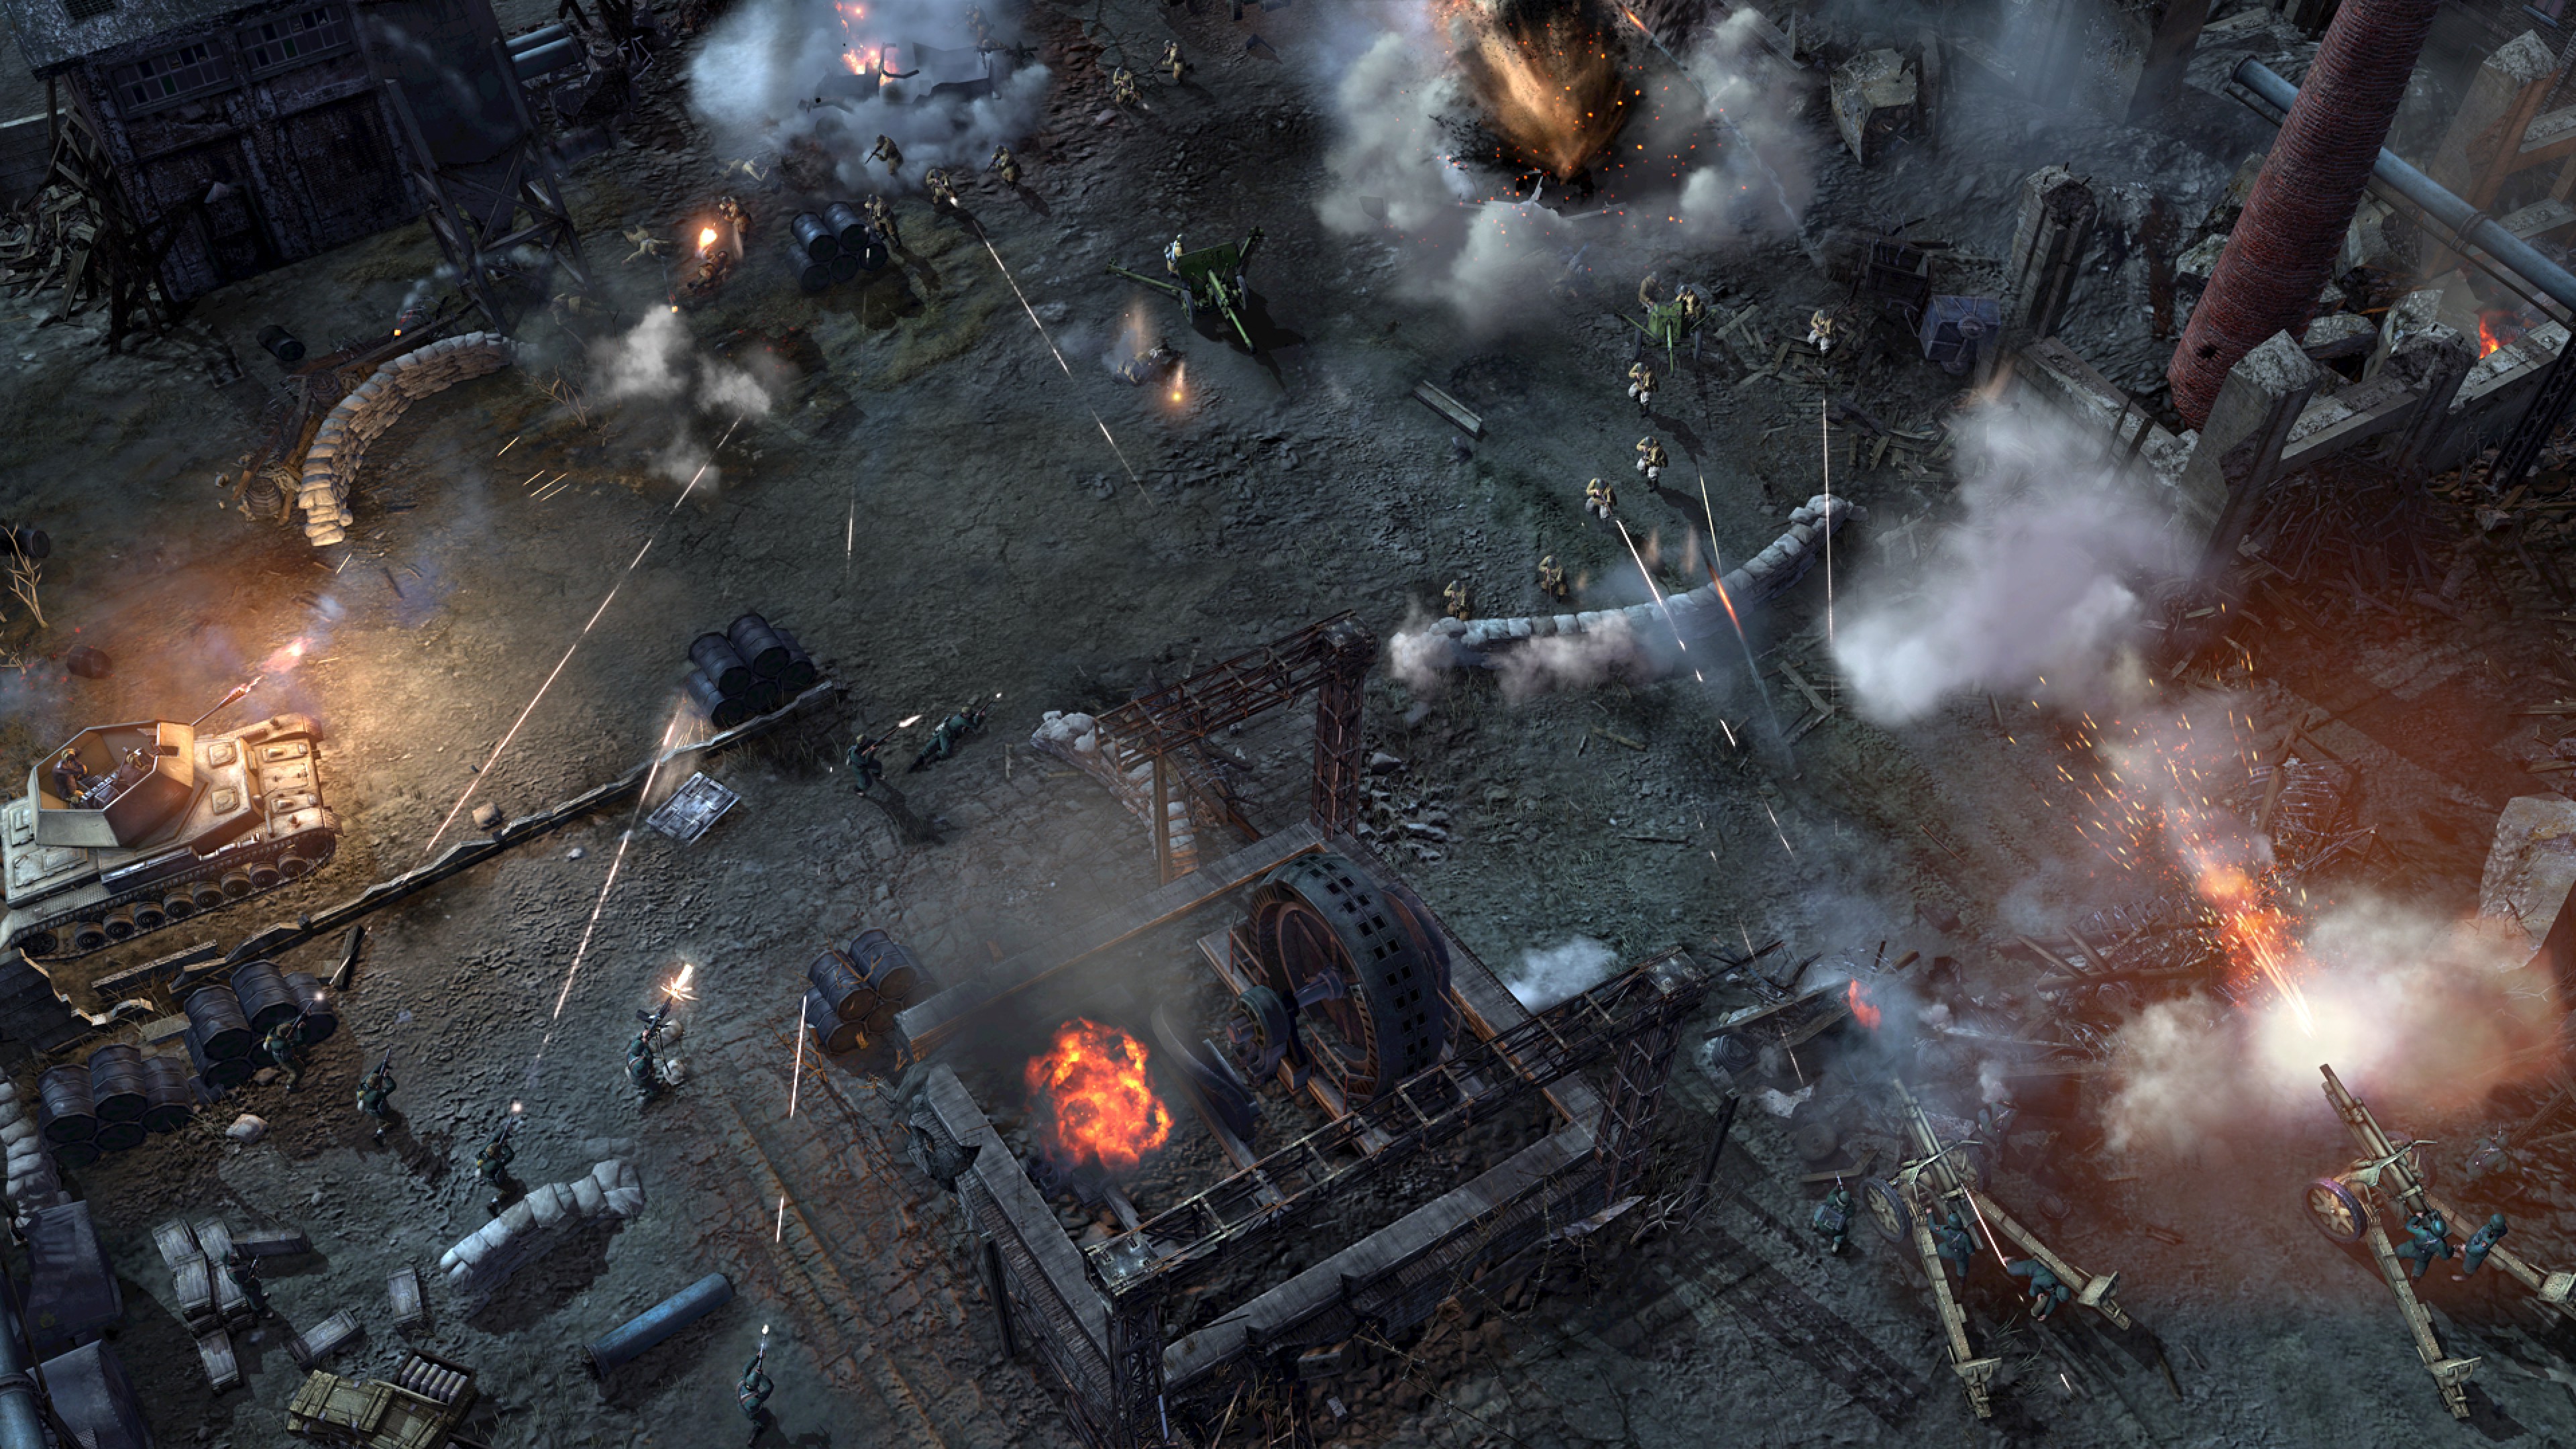 company of heroes 2 mac torrent download pirate bay